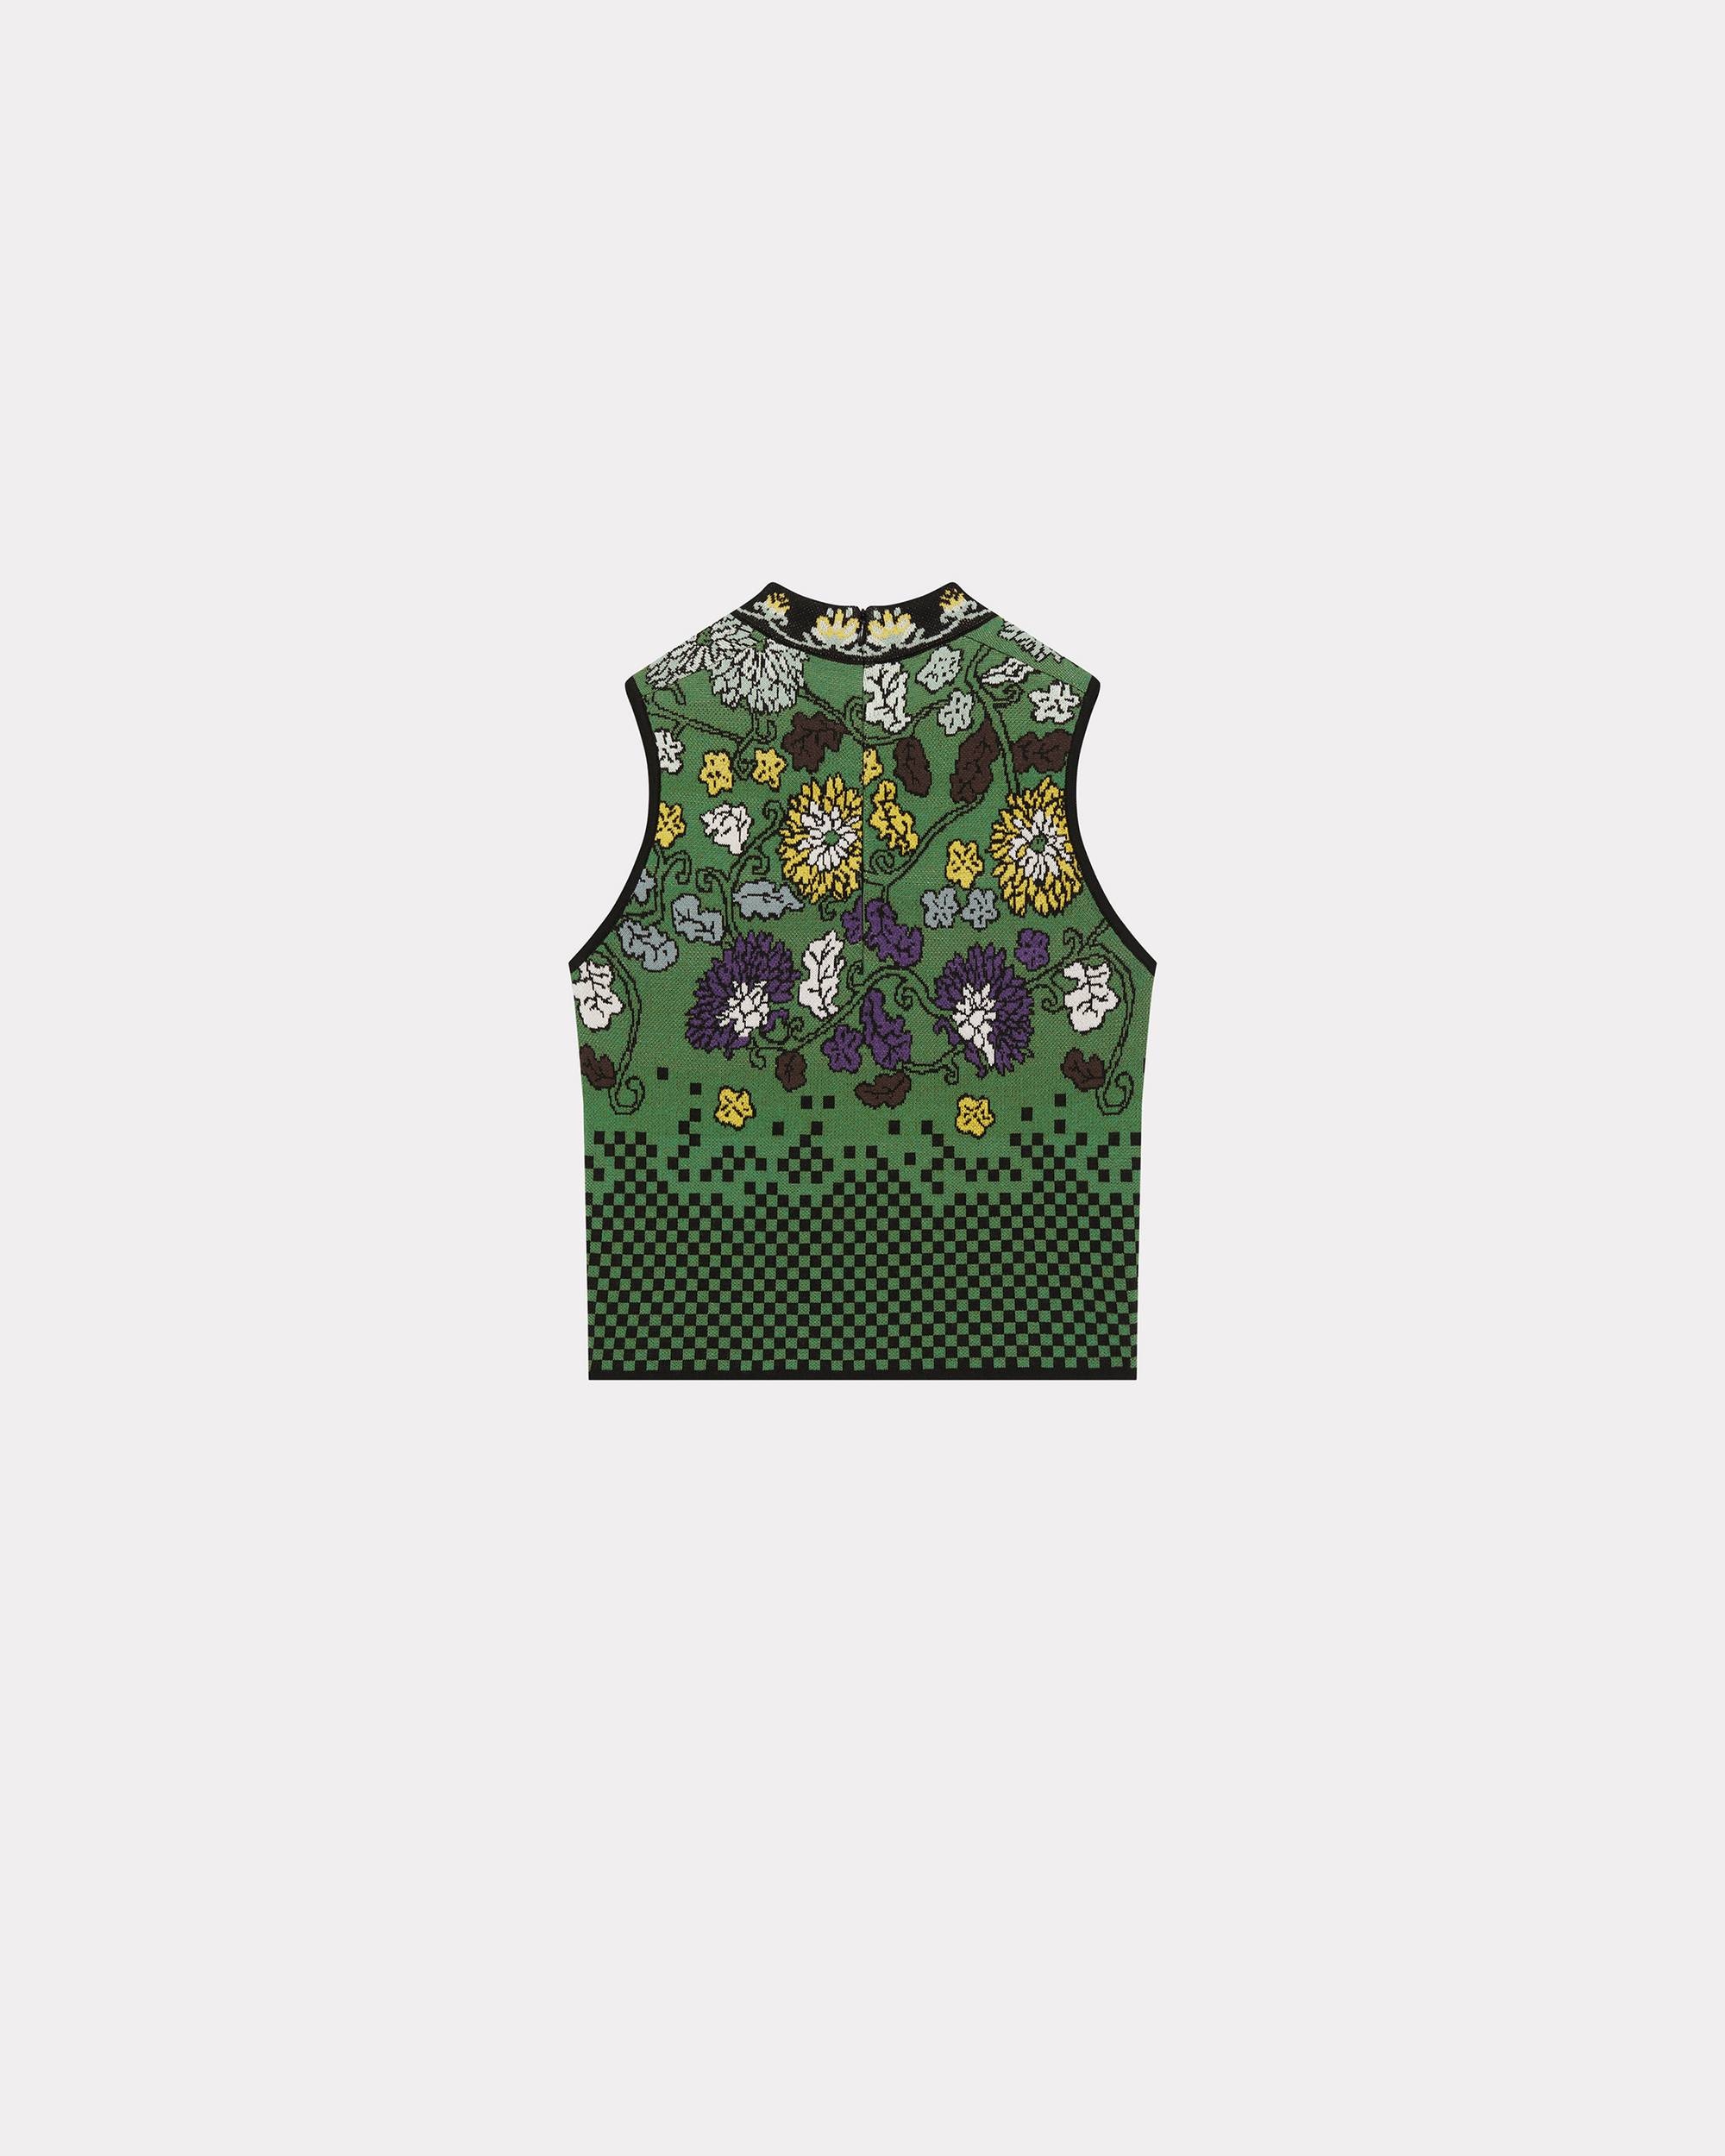 'KENZO Archive Floral' jumper - 2